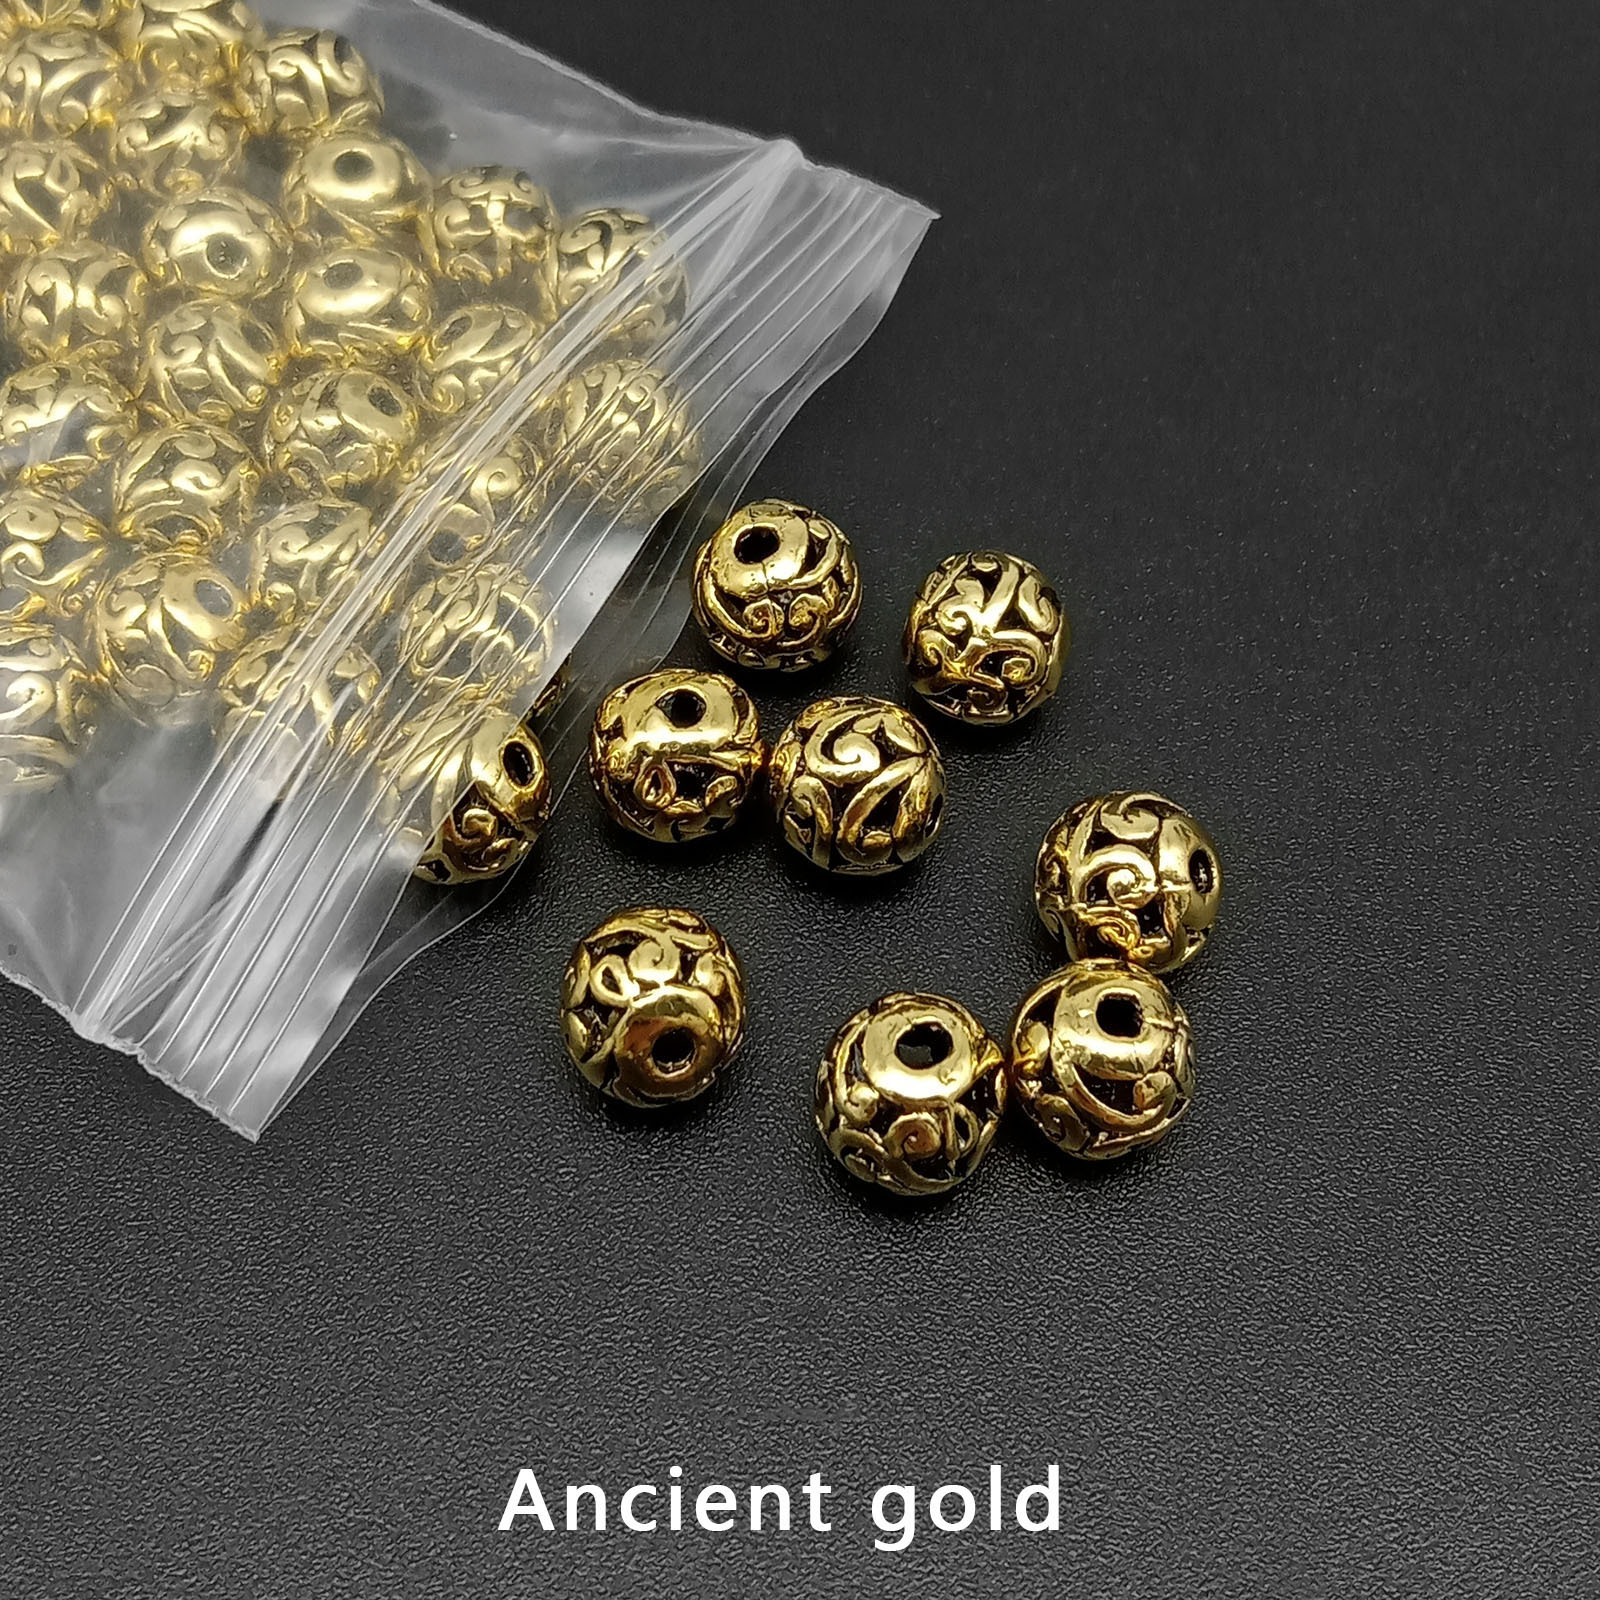 2:Ancient Gold